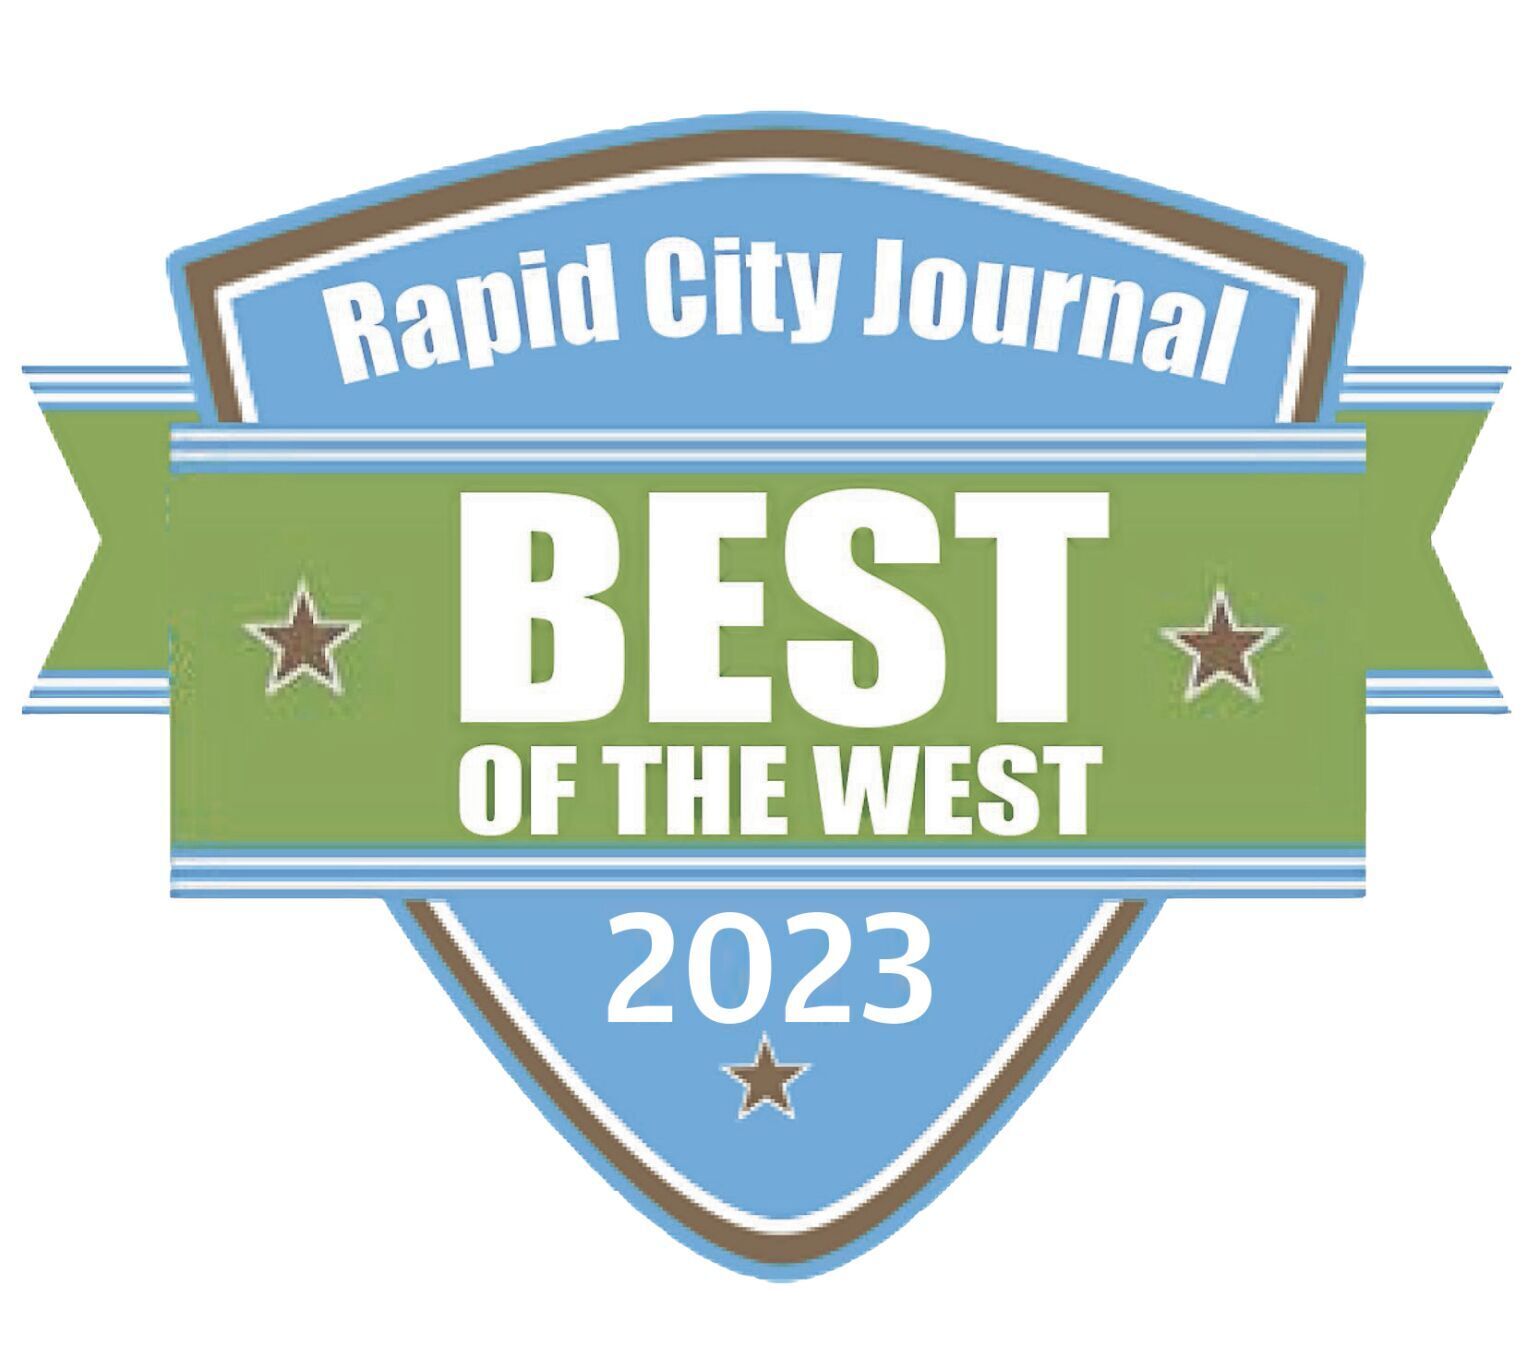 Rapid City Journal’s 2023 Best of the West Volleyball Team: Standout Performances and Stats